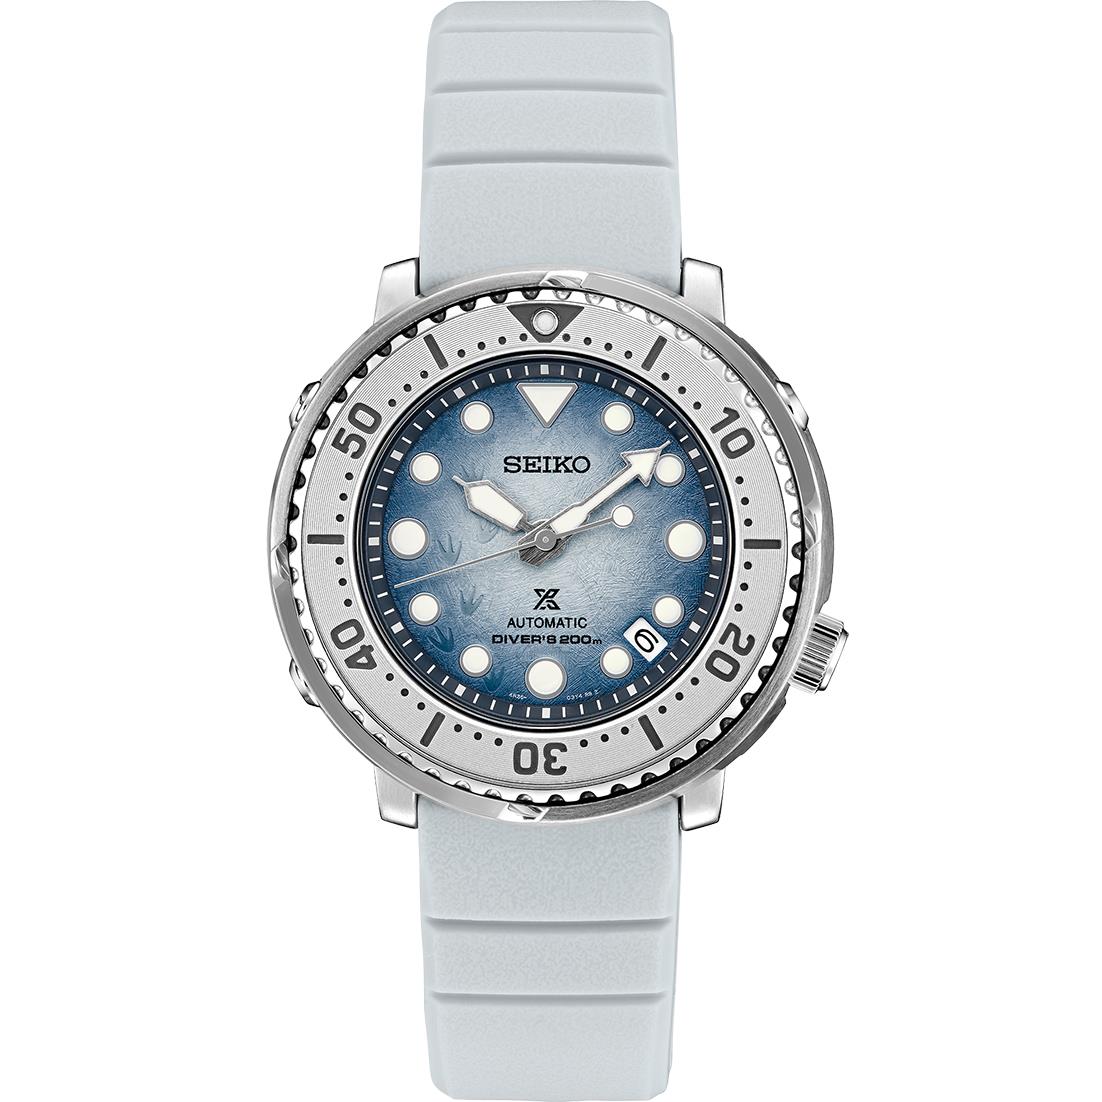 Seiko Prospex SRPG59 Save The Ocean Special Edition 43mm Automatic Men`s Watch - Dial: Blue, Band: White